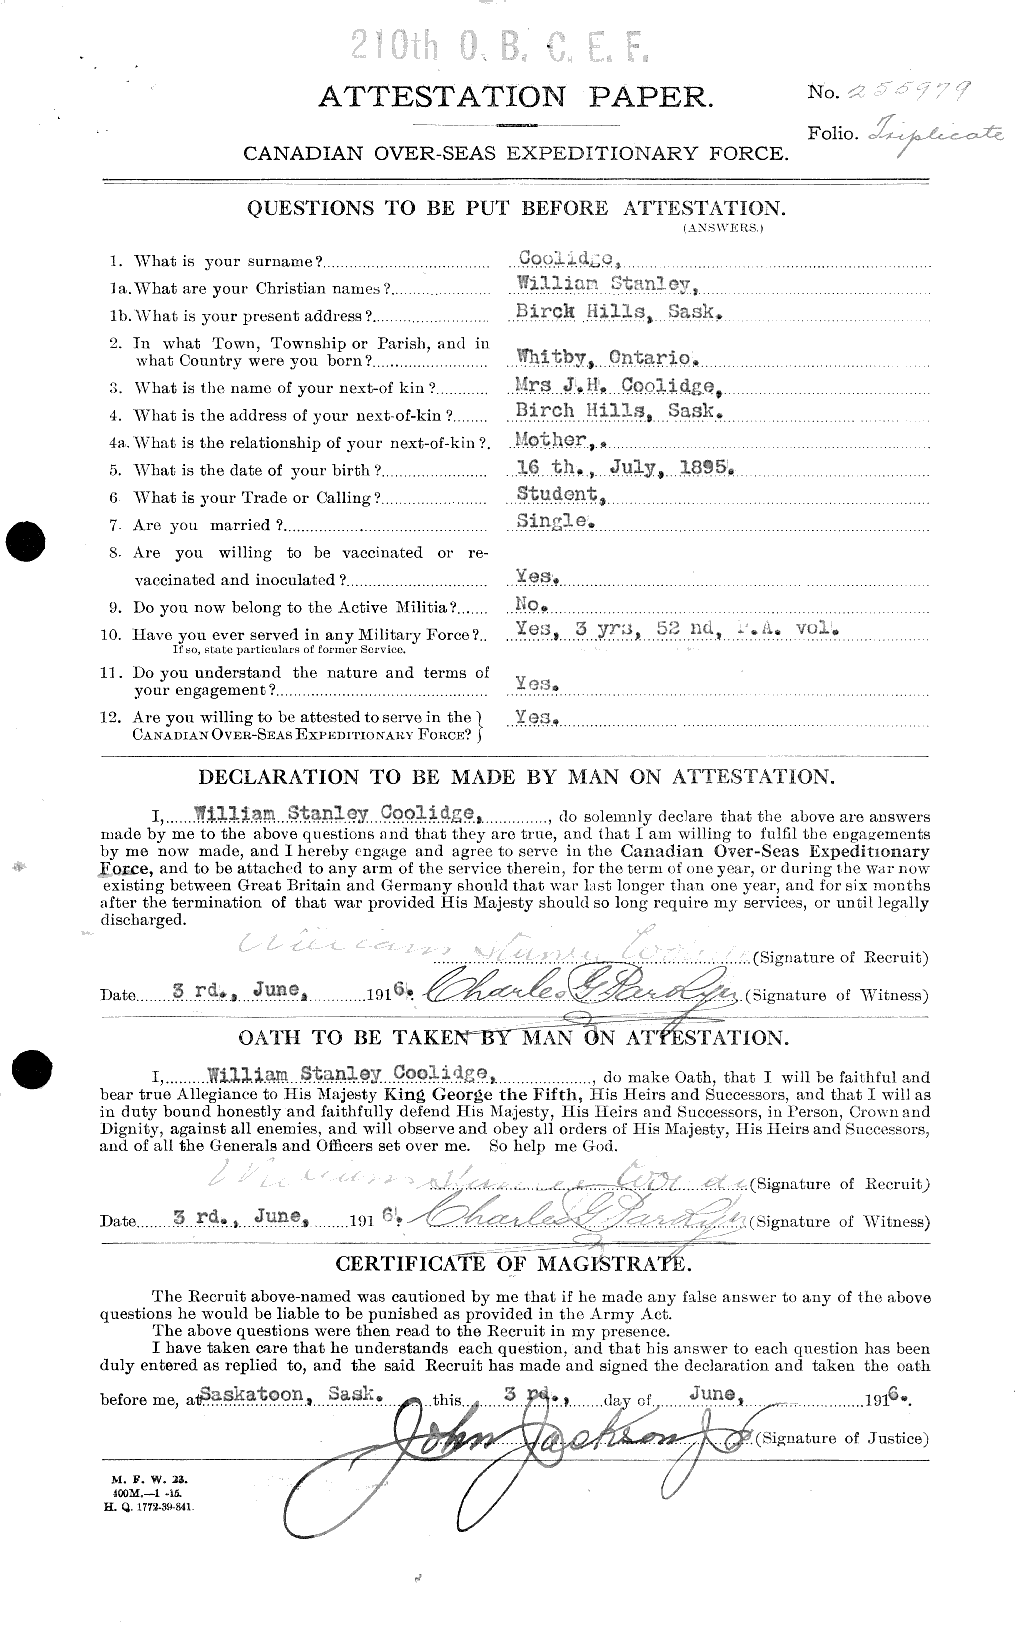 Personnel Records of the First World War - CEF 036470a